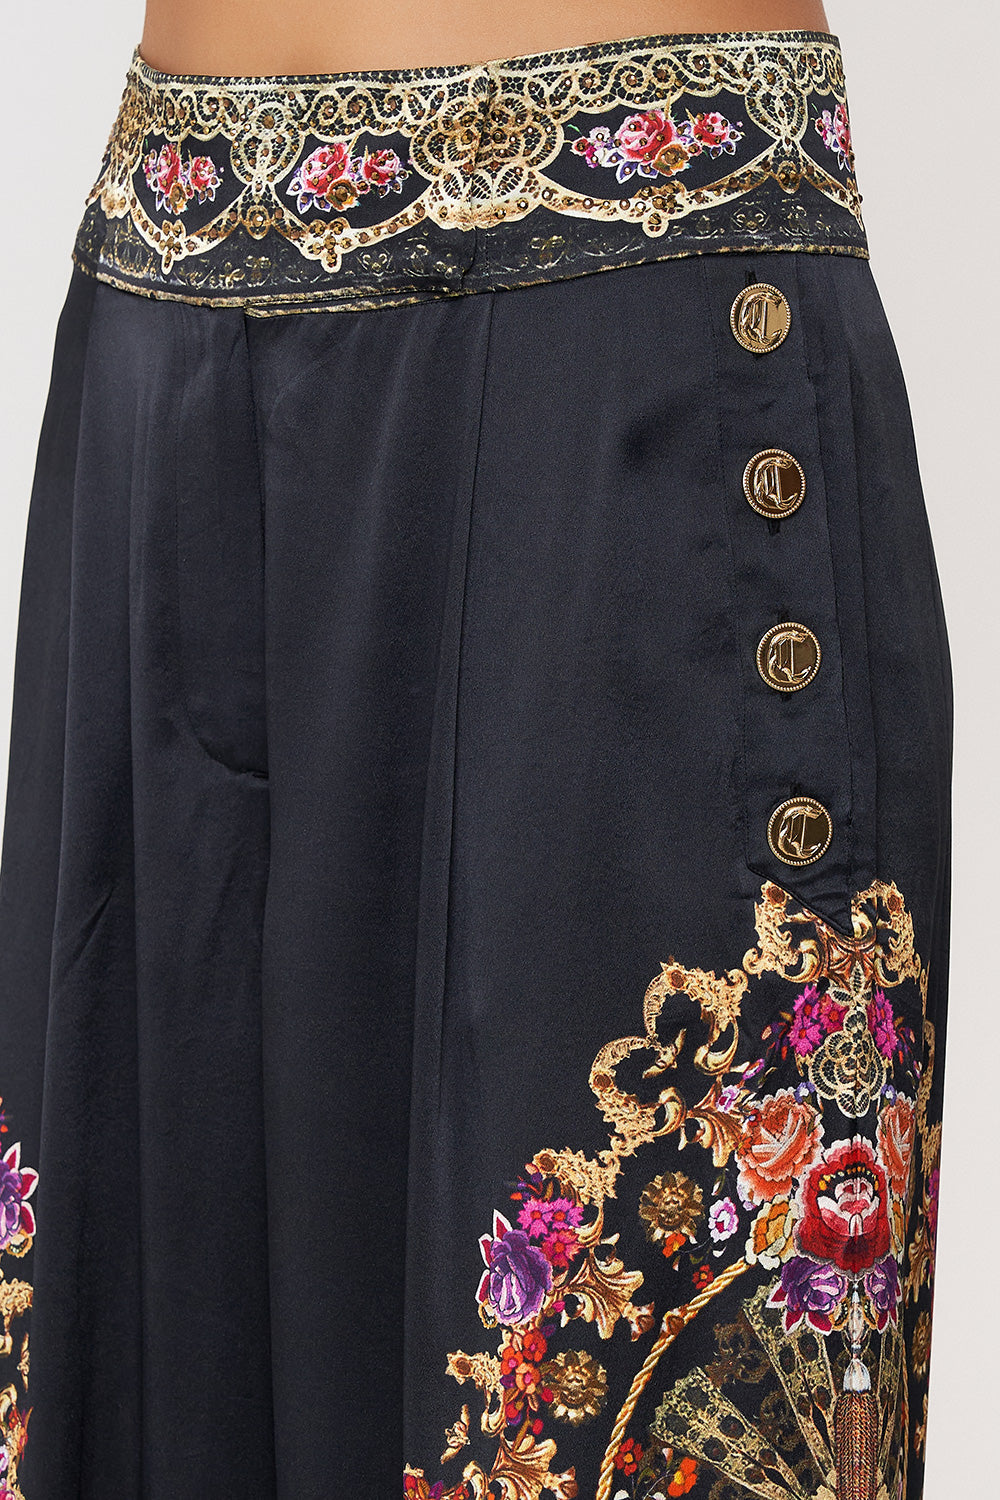 WIDE LEG PANT WITH BUTTONS DANCE WITH DUENDE